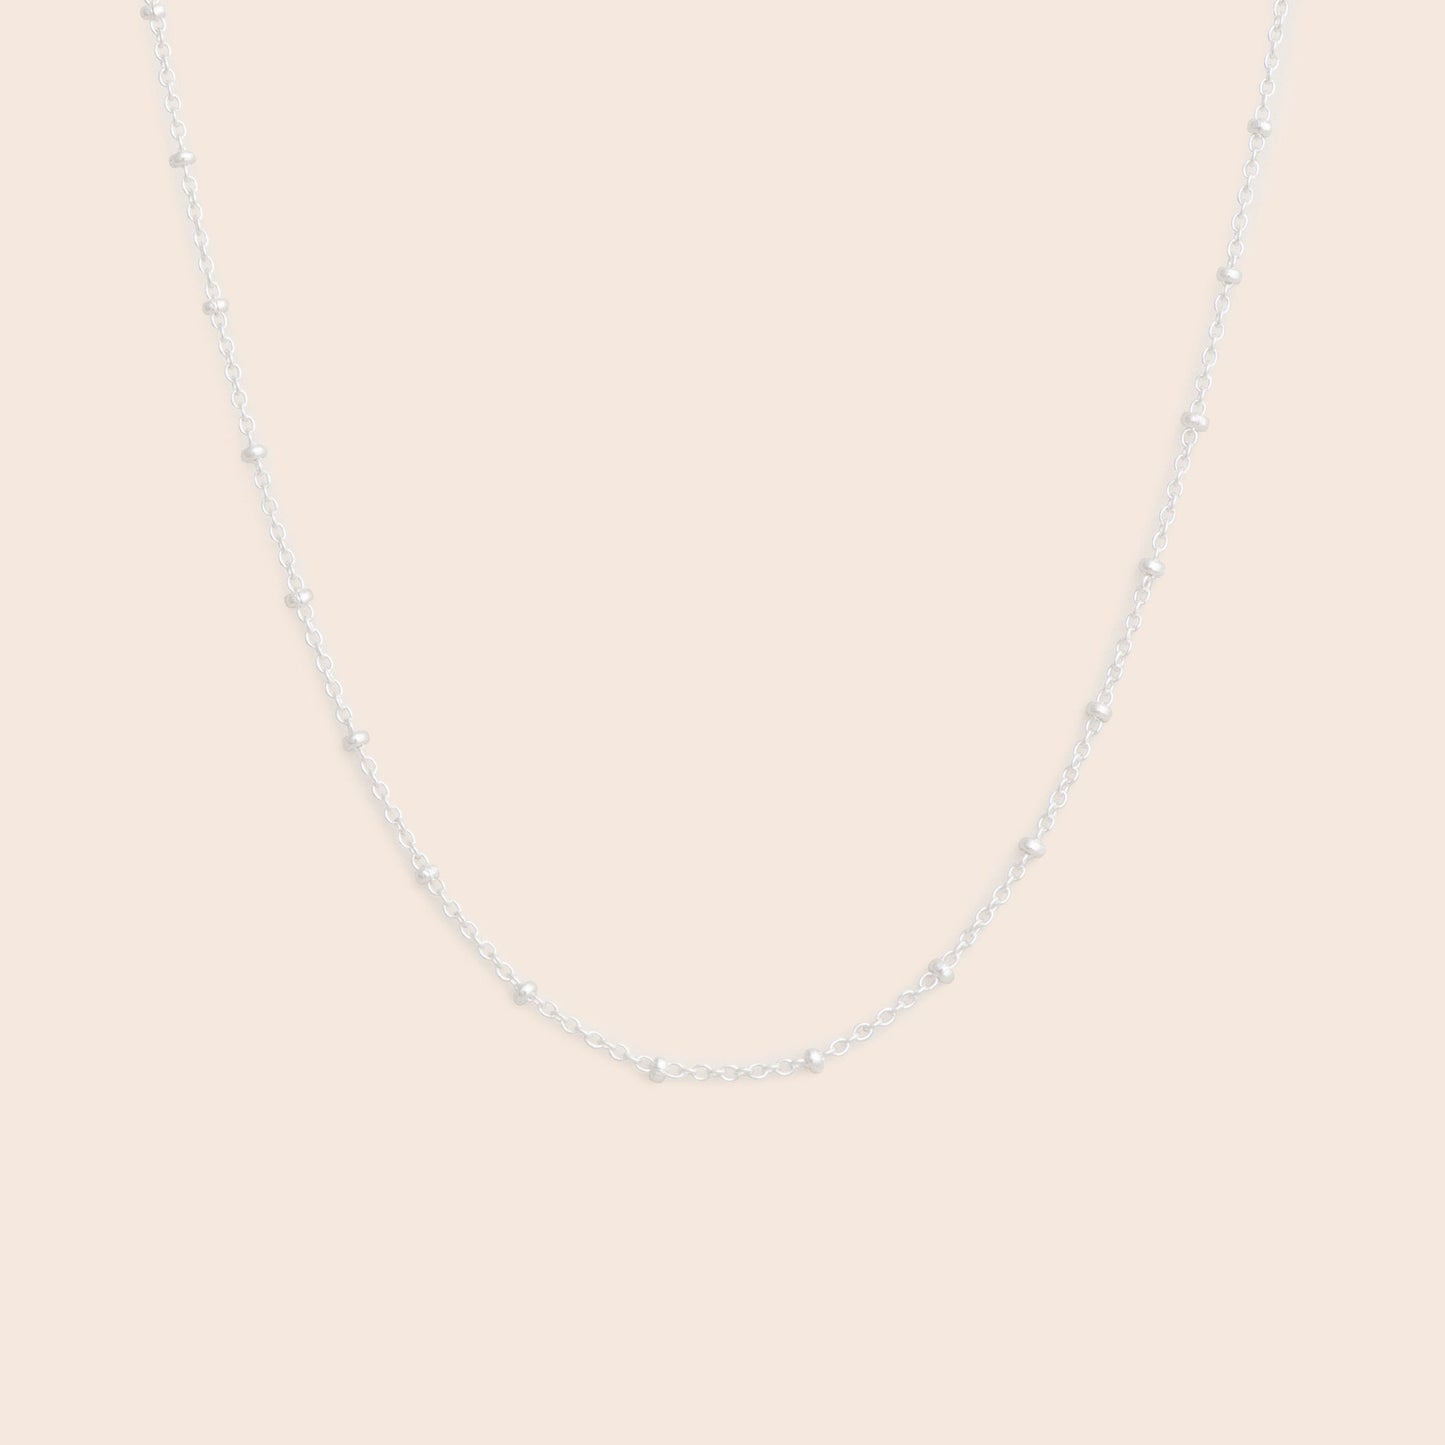 Silver Satellite Chain Necklace - Gemlet